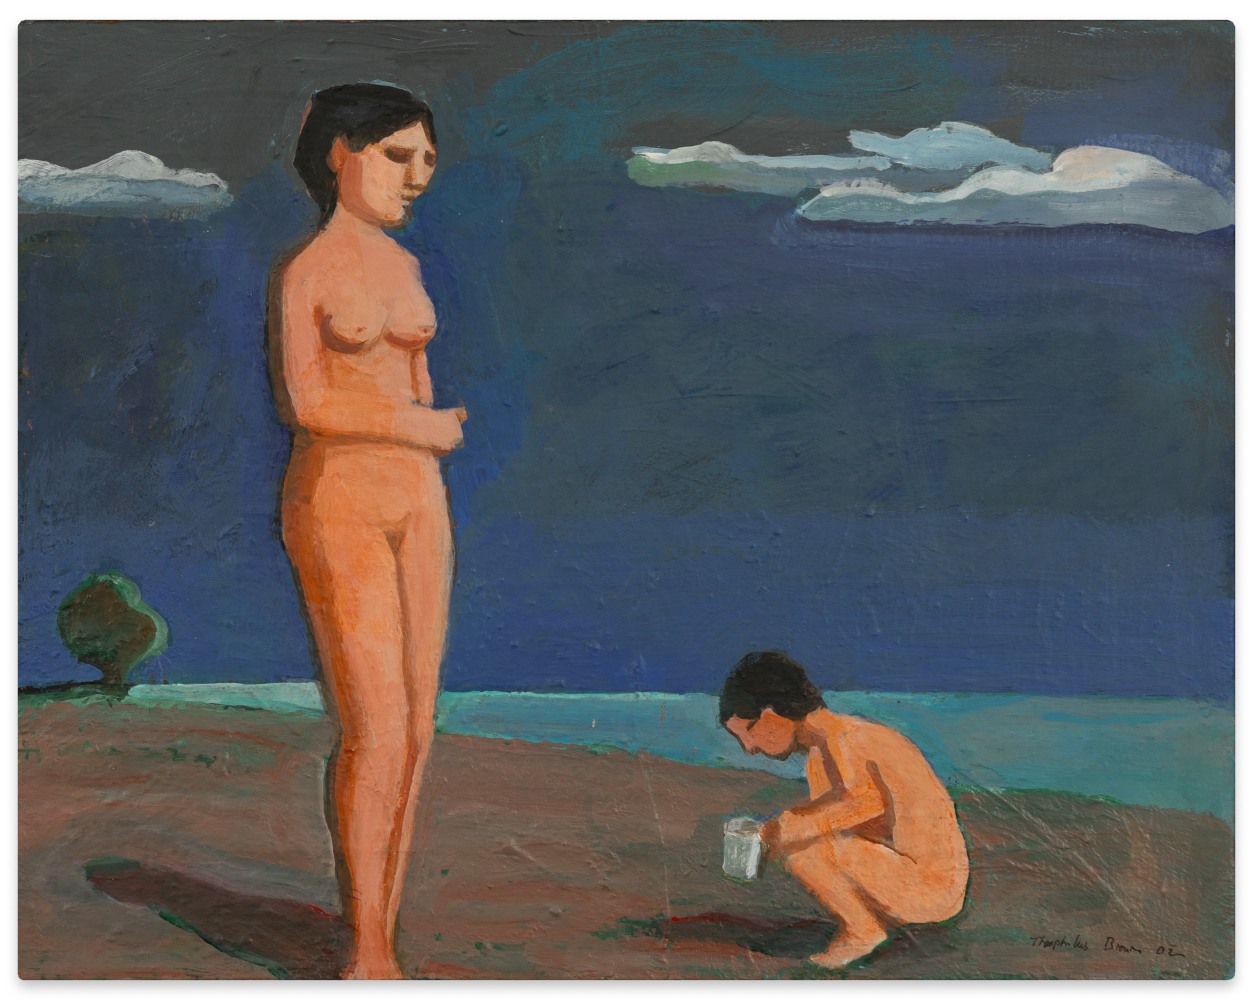 William T. Brown Untitled (Nudes with Tree)(Woman and Child), 2002 acrylic on canvas 11 x 14 in.